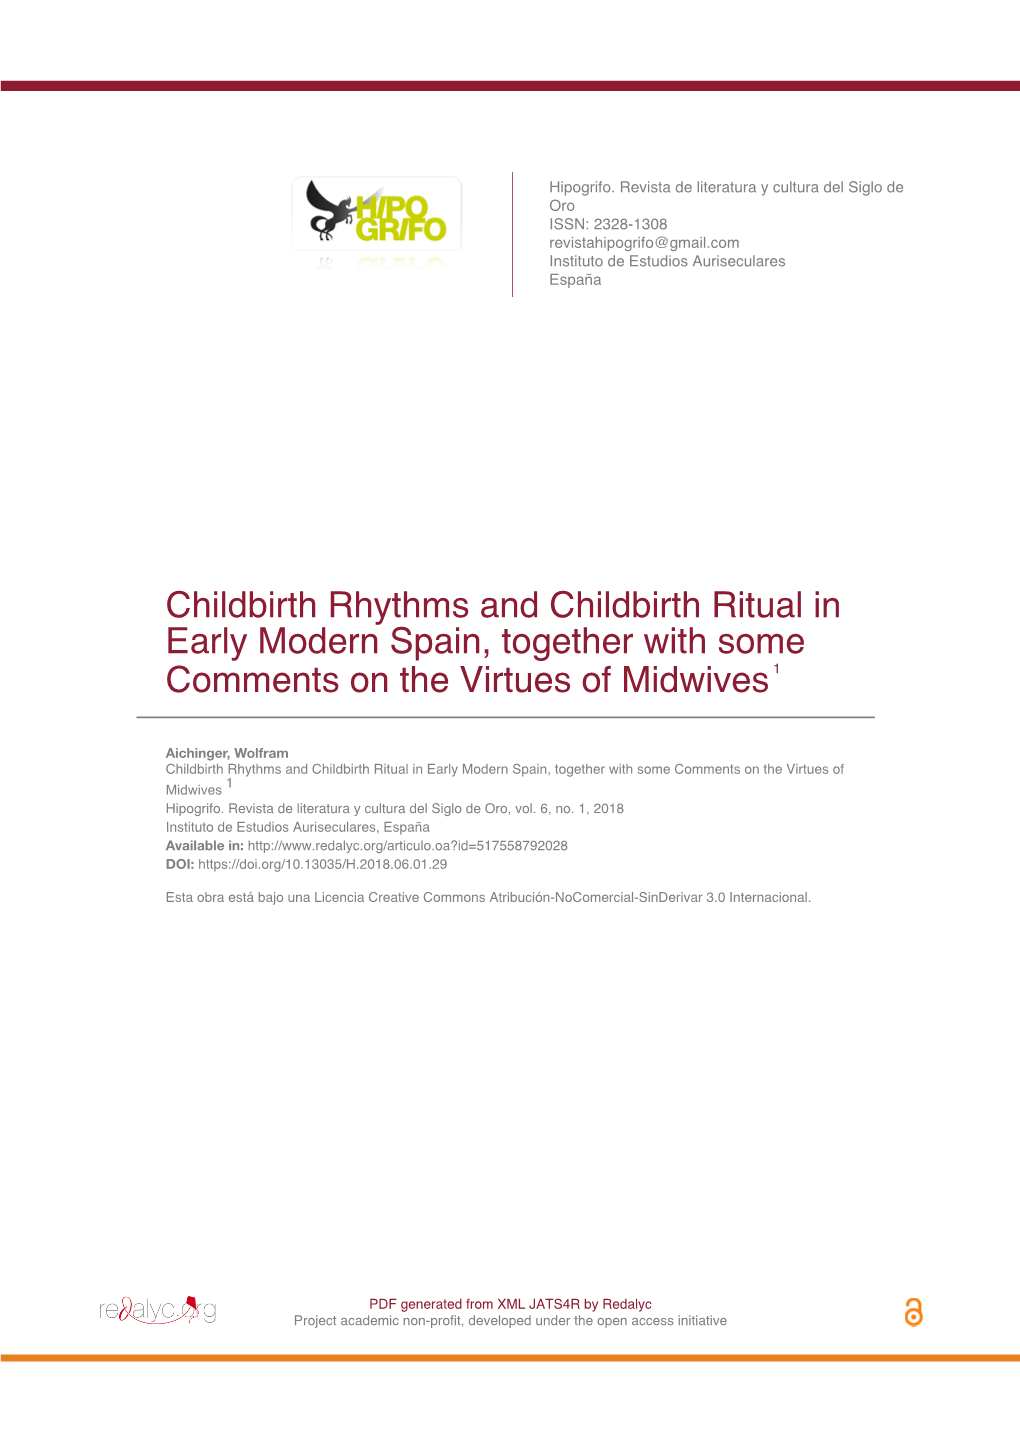 Childbirth Rhythms and Childbirth Ritual in Early Modern Spain, Together with Some Comments on the Virtues of Midwives 1